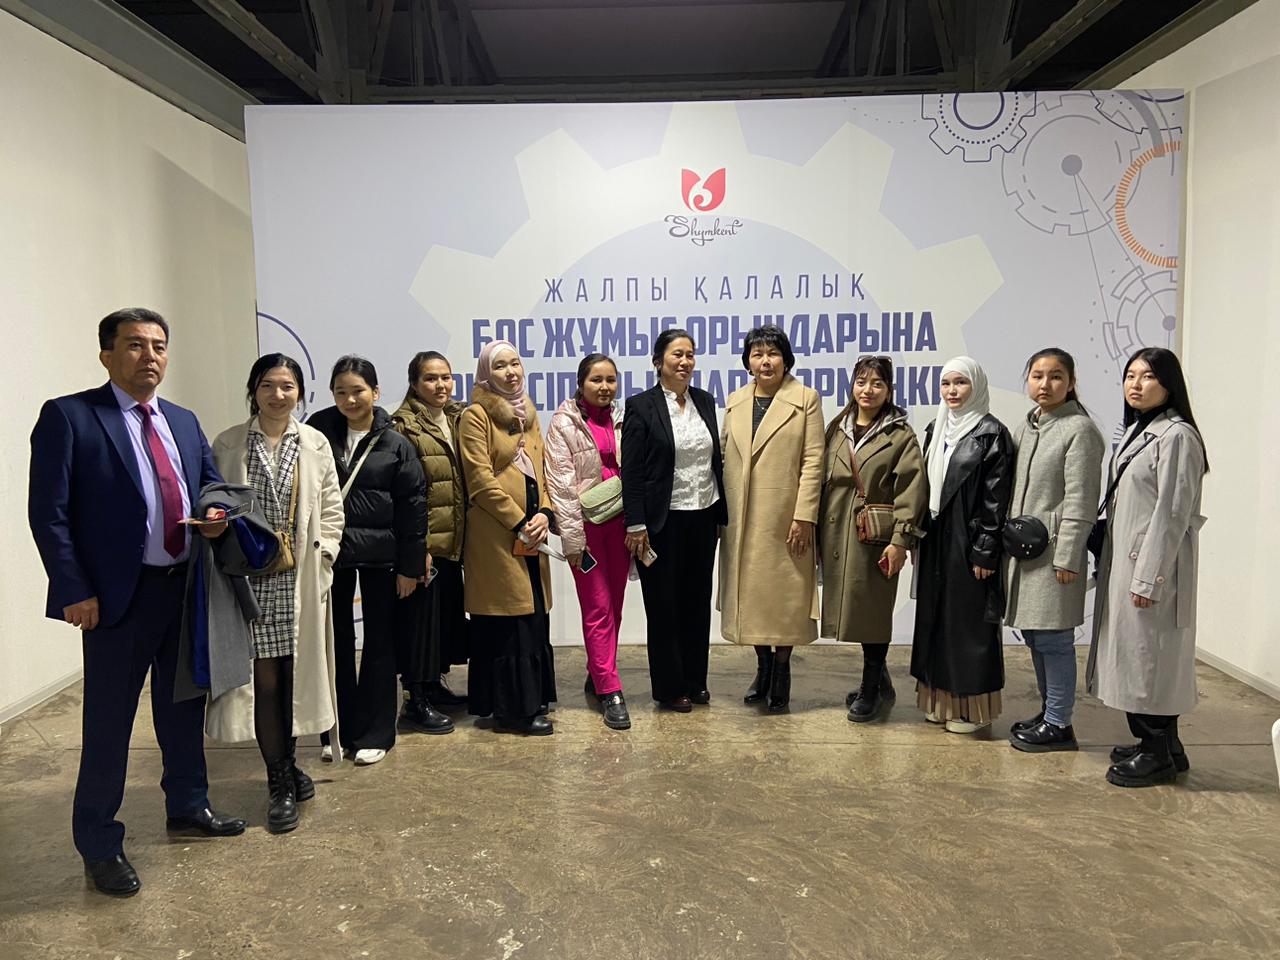 &quot;Job Fair&quot; was held in the economic zone &quot;South&quot; of Shymkent, with the participation of large enterprises